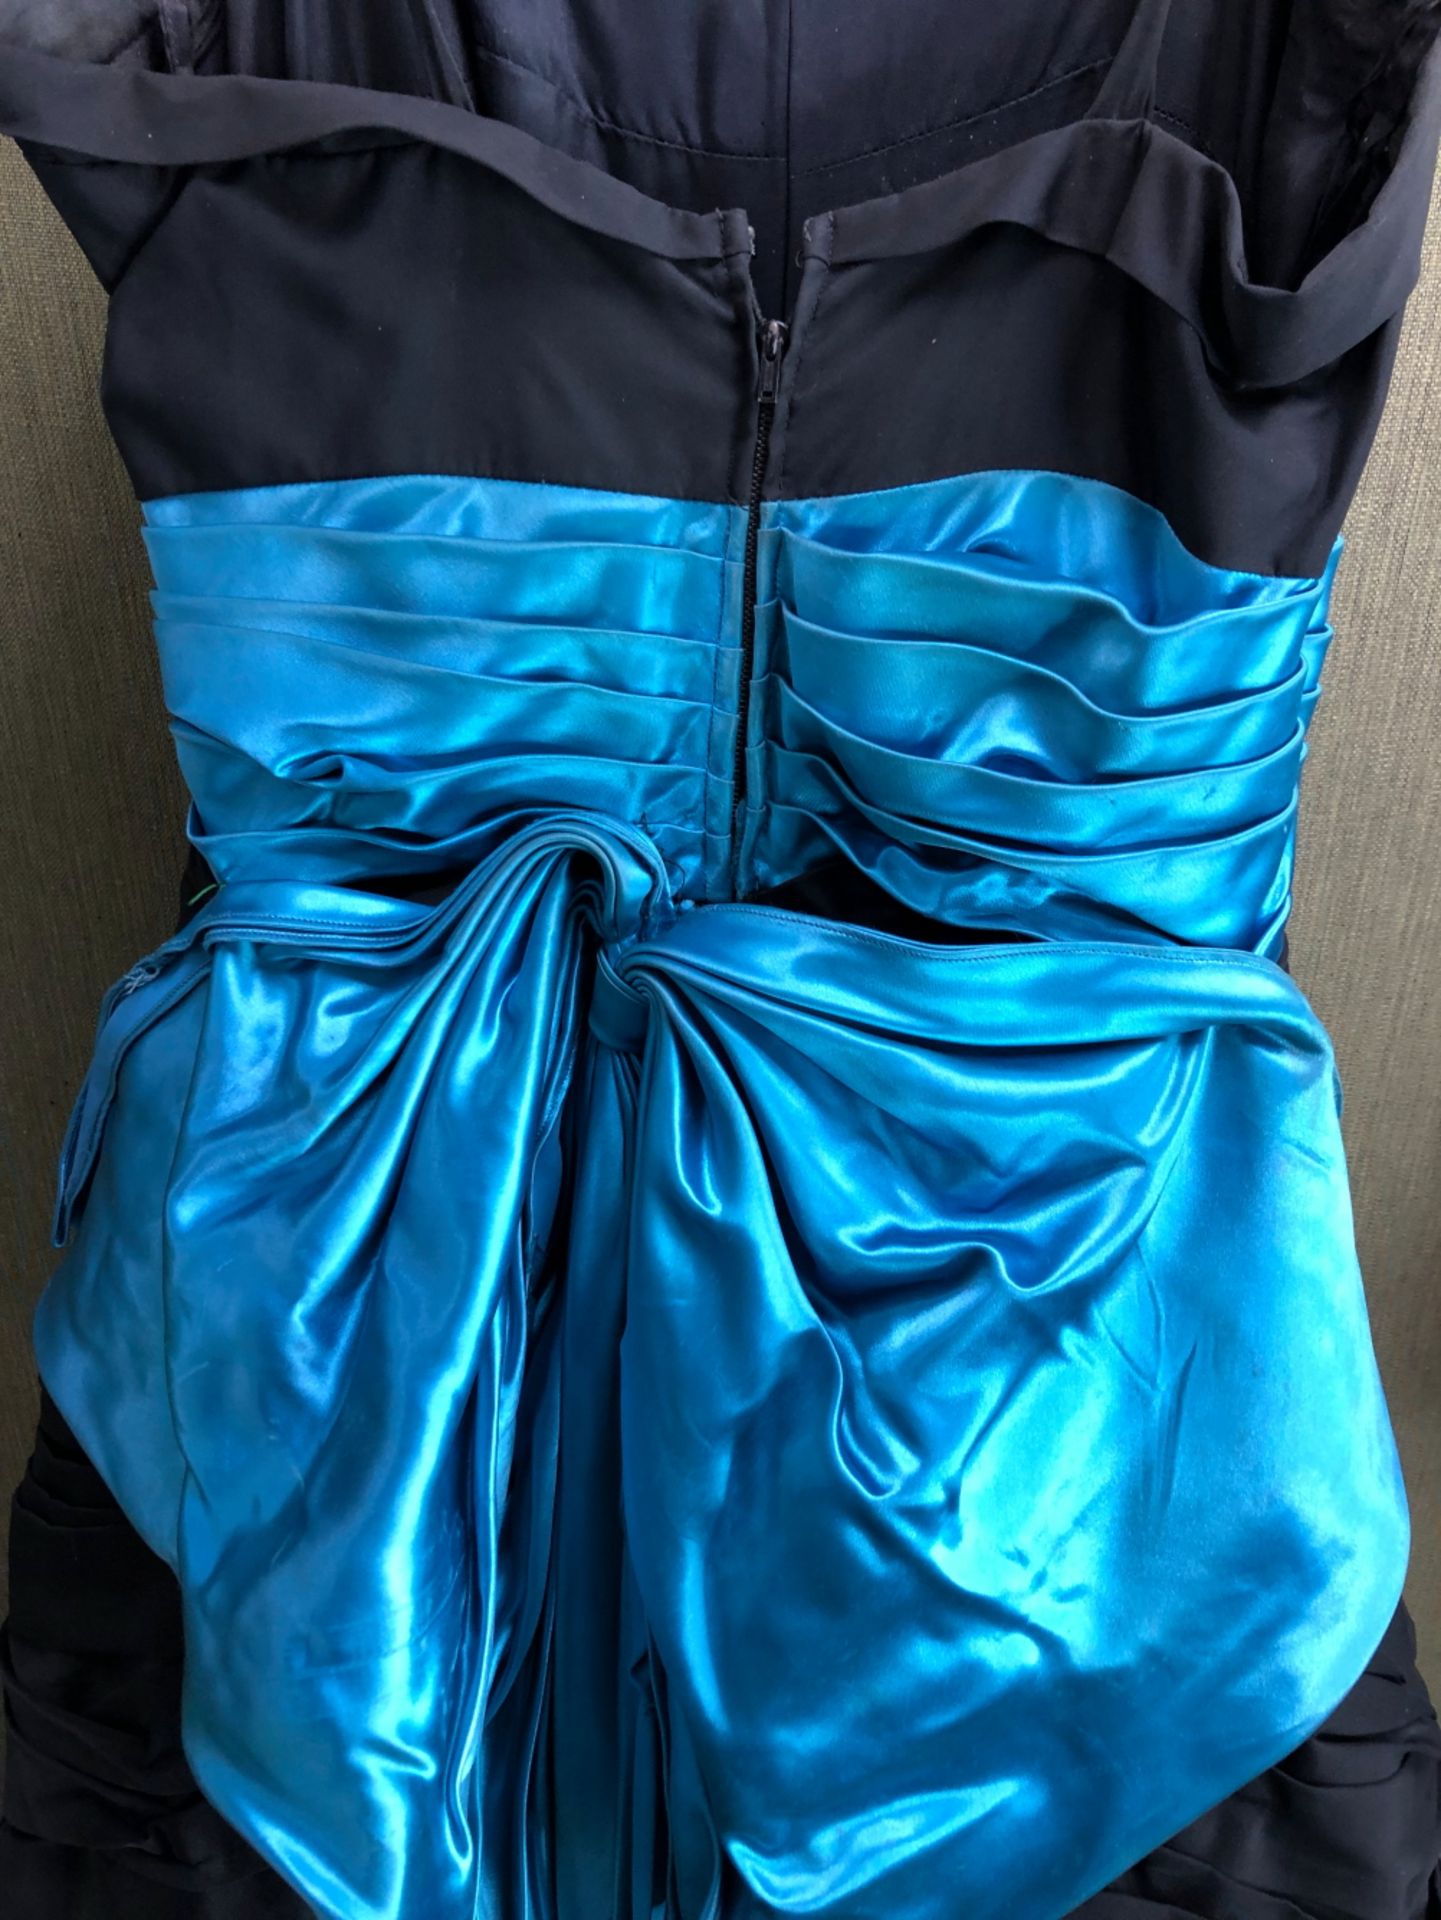 A BLACK EVENING DRESS WITH BRIGHT BLUE RIBBON - Image 3 of 5